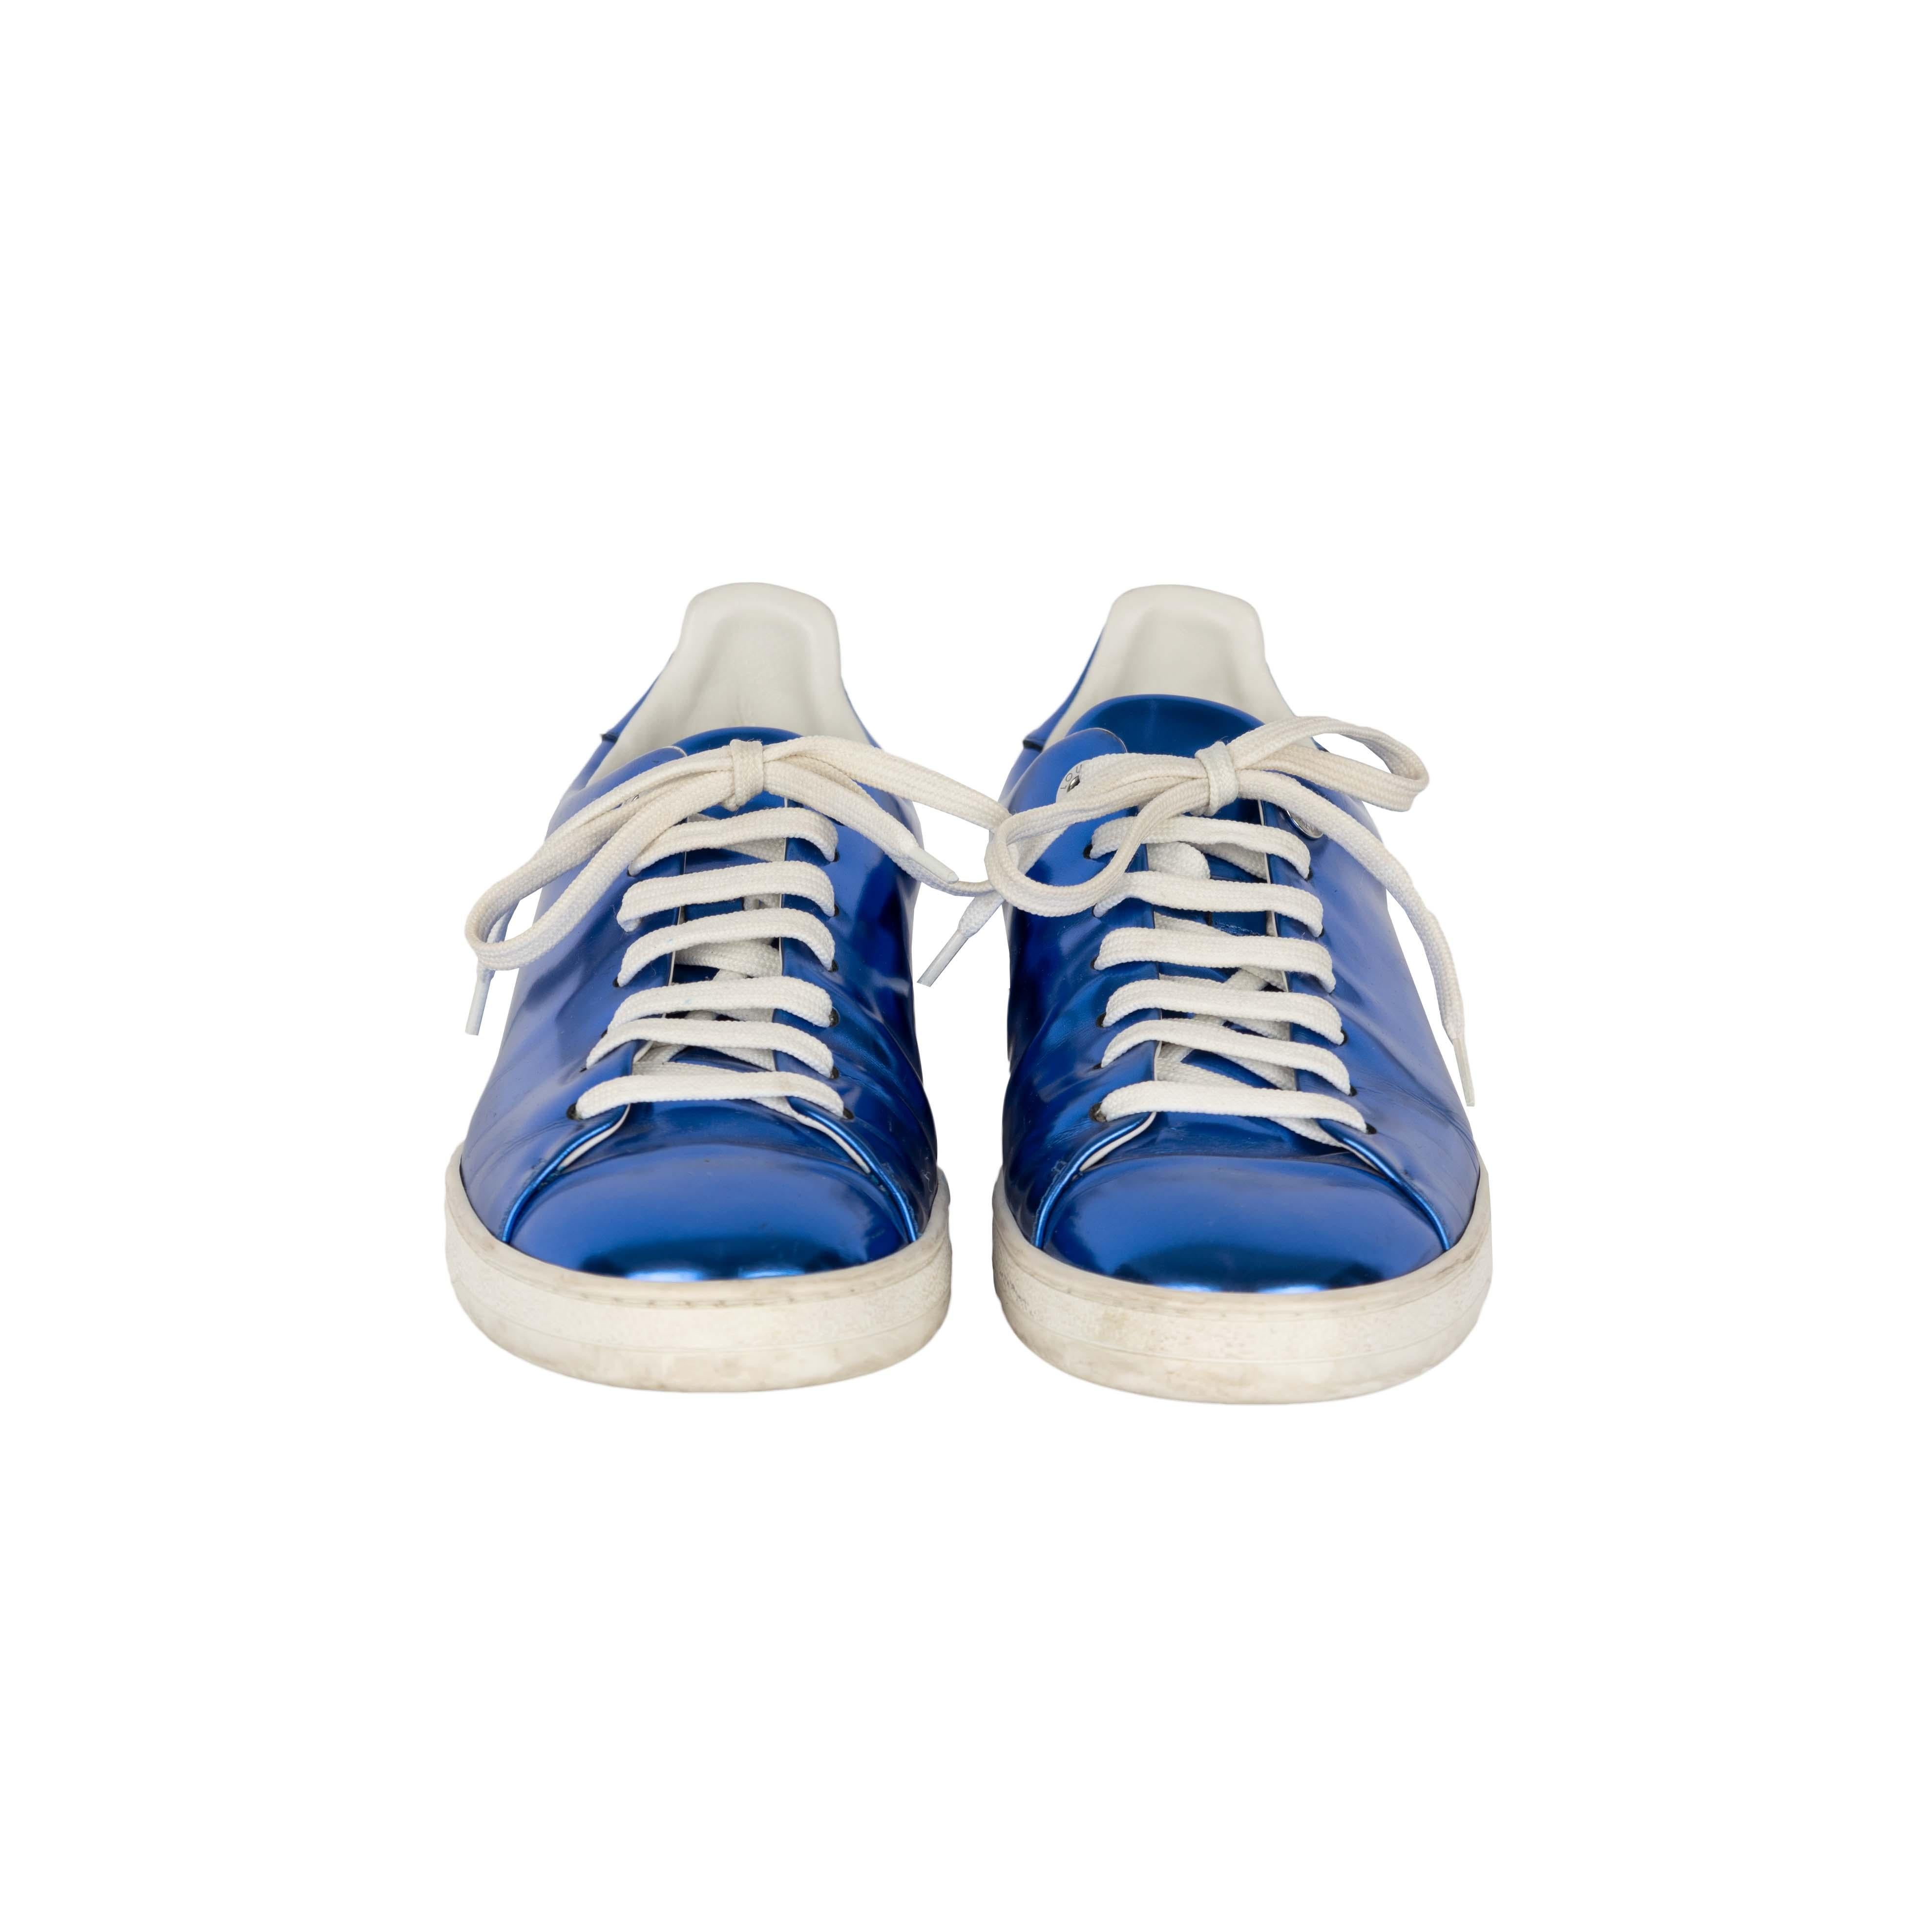 Shine through the crowd with these Louis Vuitton Metallic Blue Sneakers. The brand emblem attached to the side sole and the logo displayed on the bottom add to the branding flair of this made-in-Italy shoe.

Inclusion: dust bag

Insole Length -25